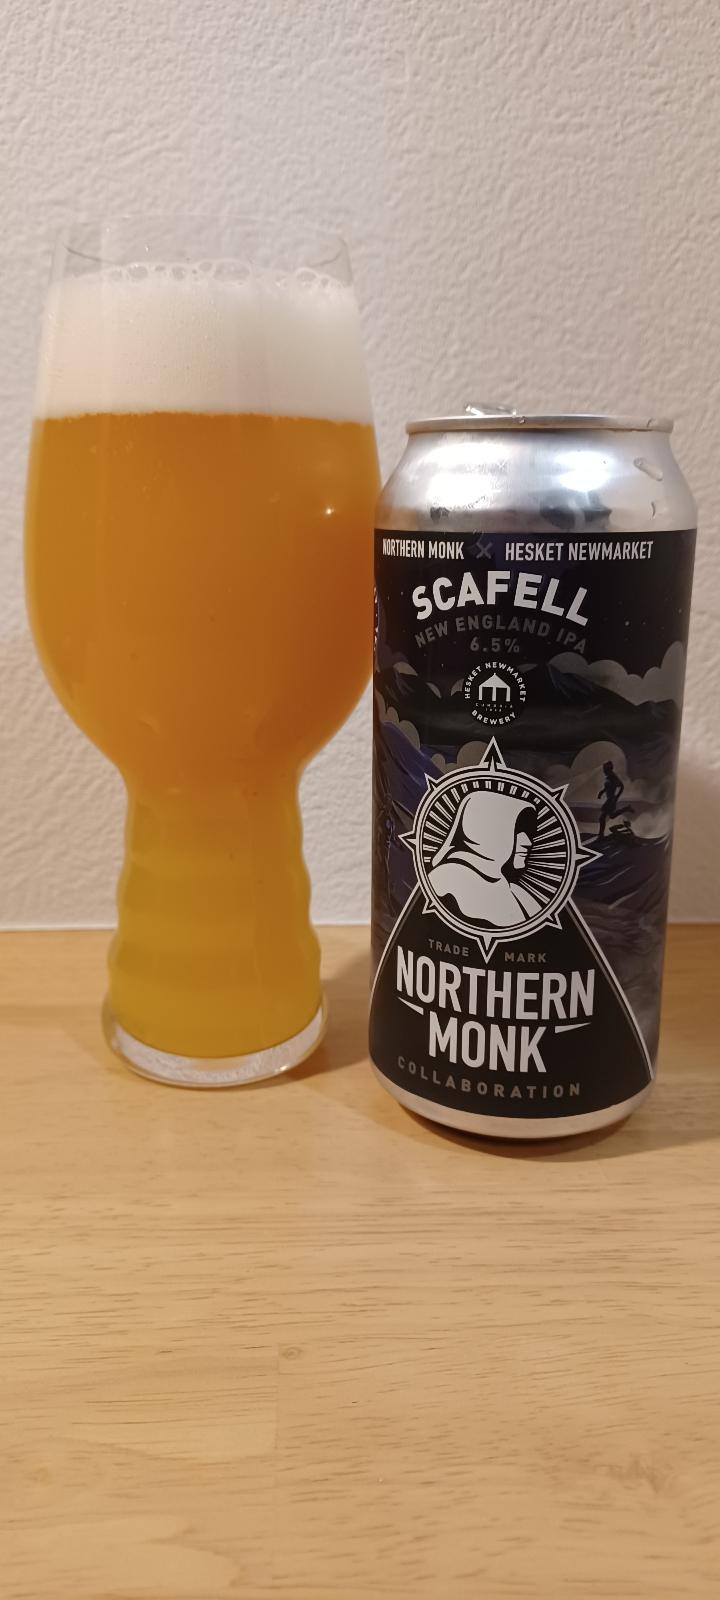 Scafell (Collaboration with Hesket Newmarket Brewery)